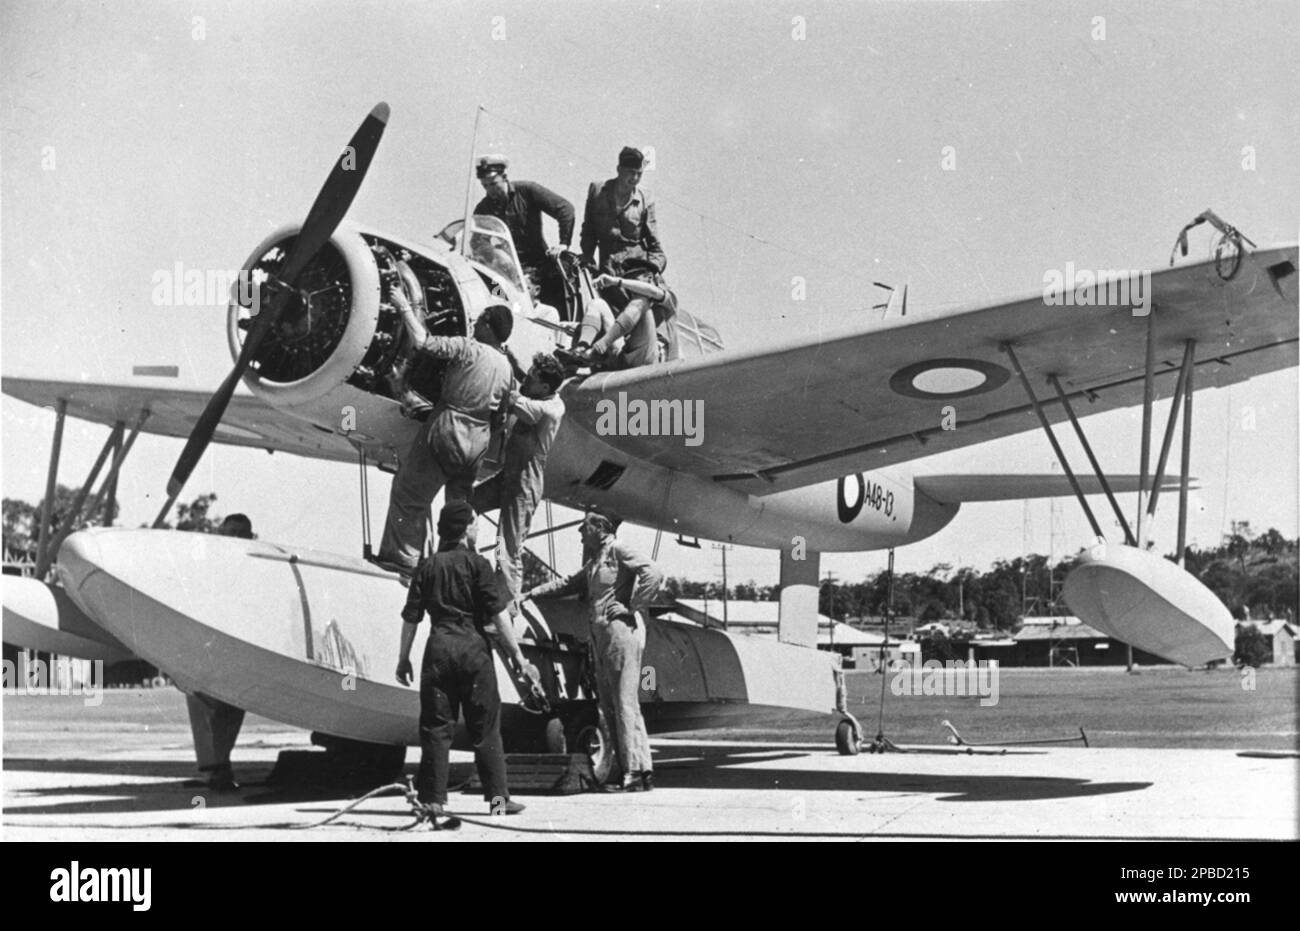 Engineers check out The Polar Star, a single-engine Vought-Sikorsky Kingfisher floatplane bound for Antarctica on board the HMAS Wyatt Earp in 1947-48. Stock Photo